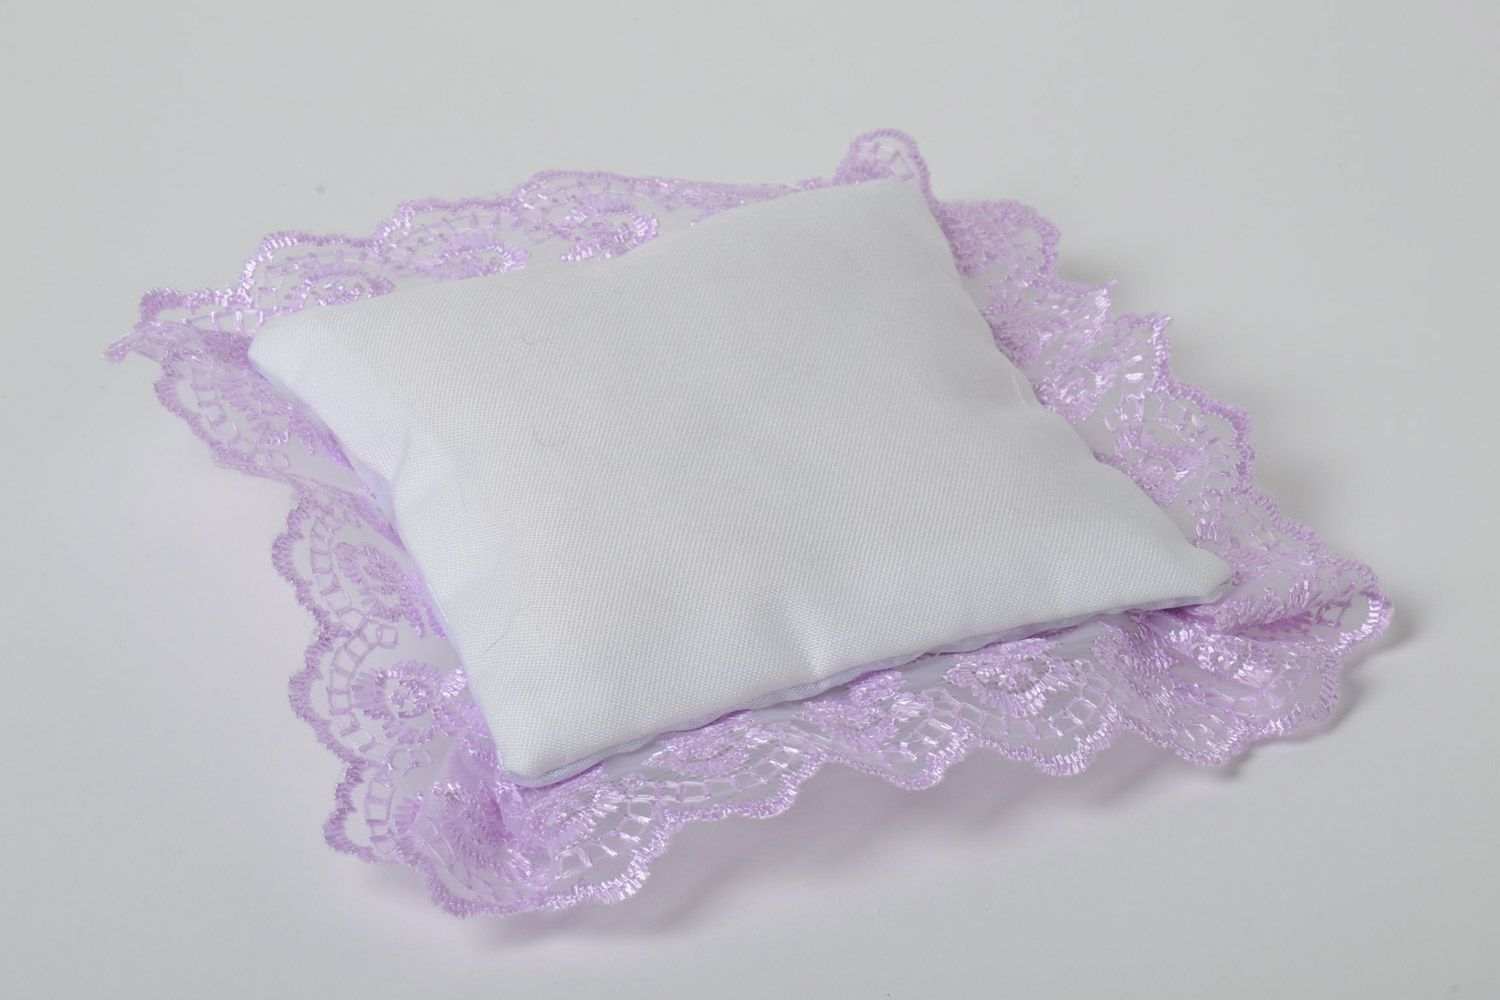 Handmade wedding rings pillow with lace and beads in white and lavender colors photo 4